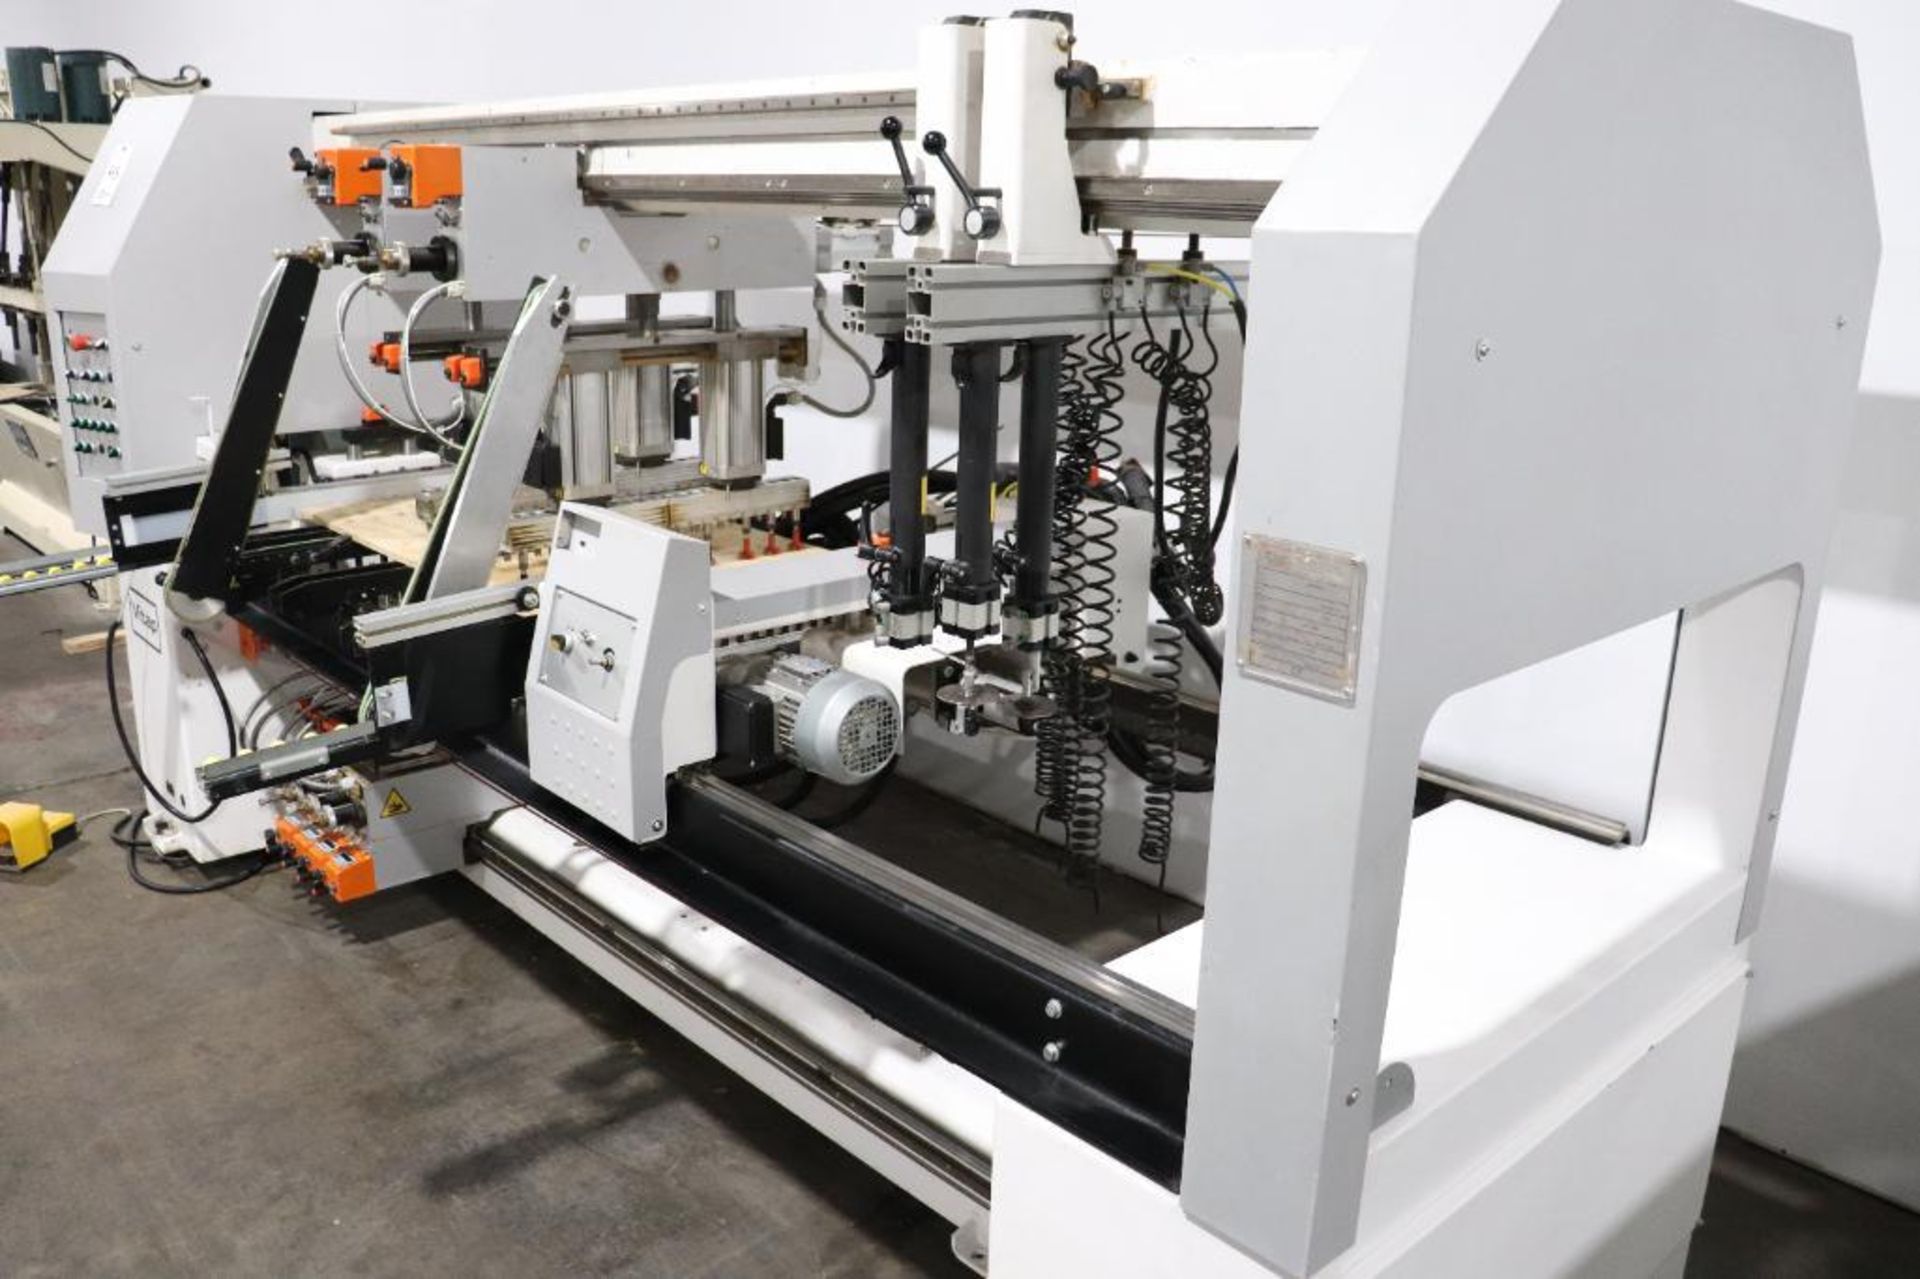 Vitap Sigma B2 174 spindle feed though Boring Machine - Image 2 of 15